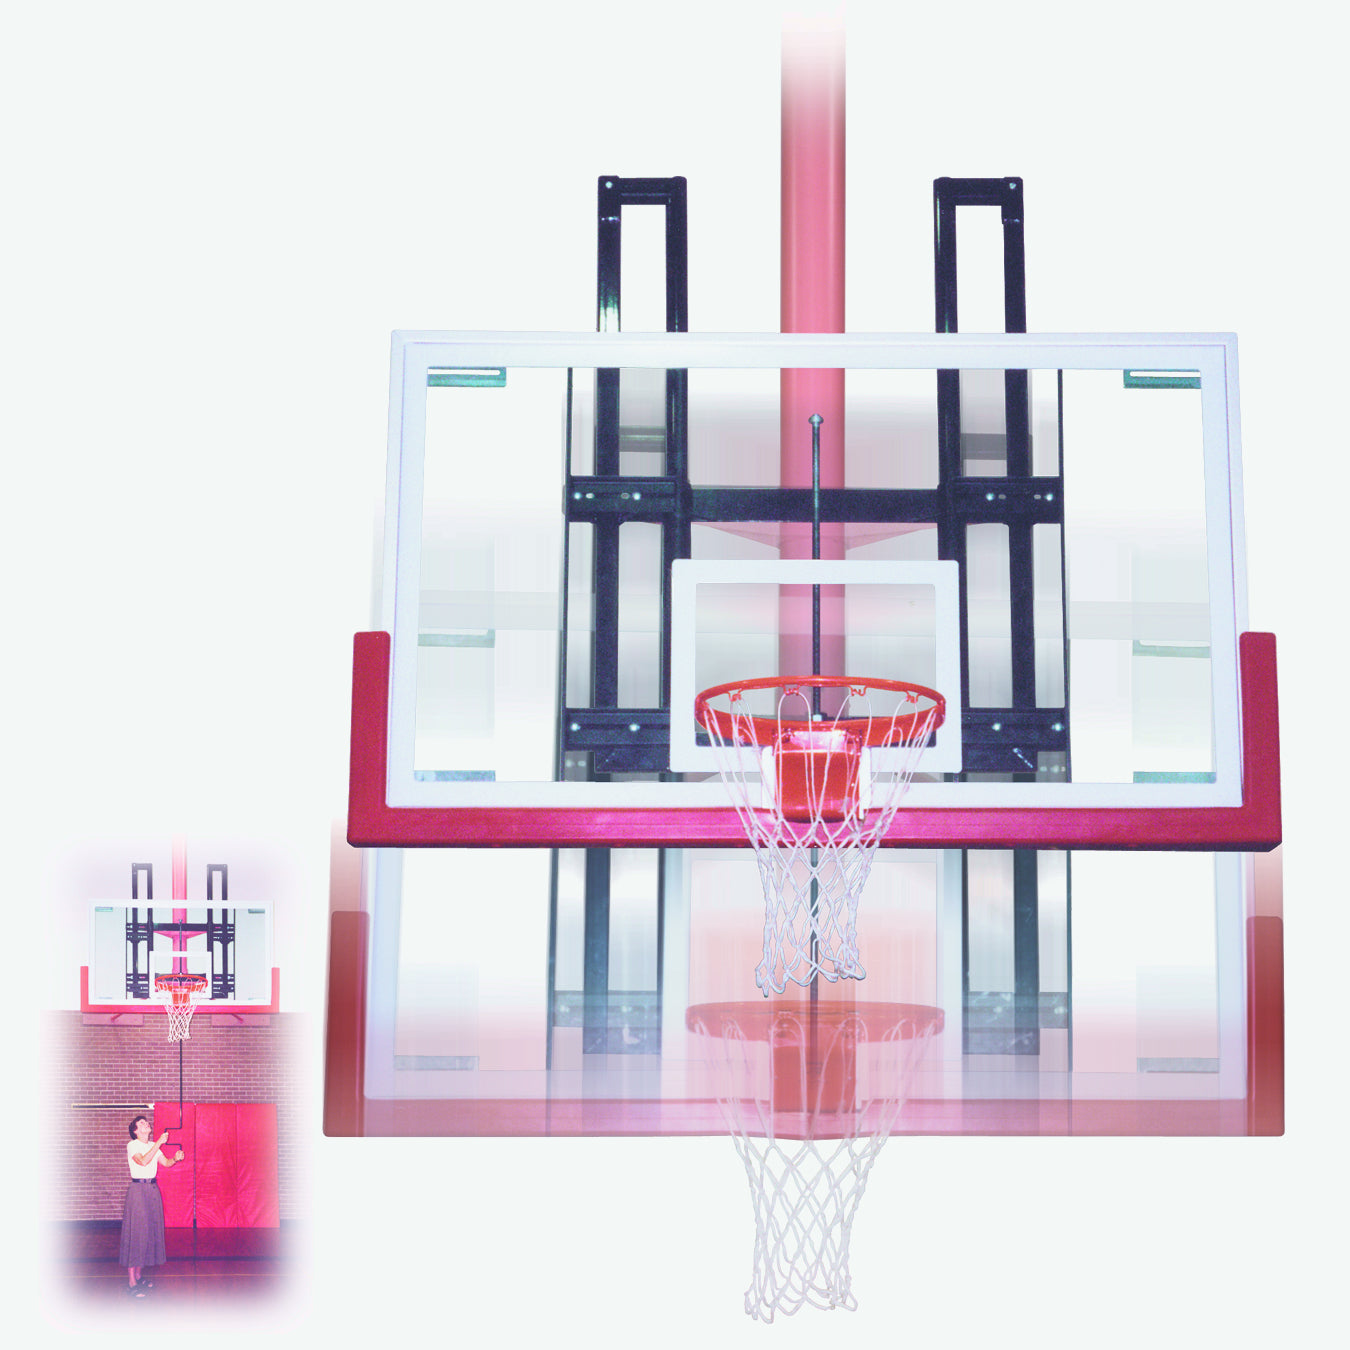 First Team SuperMount46 Tradition Wall Mounted Basketball Goal - 48"x72" Tempered Glass